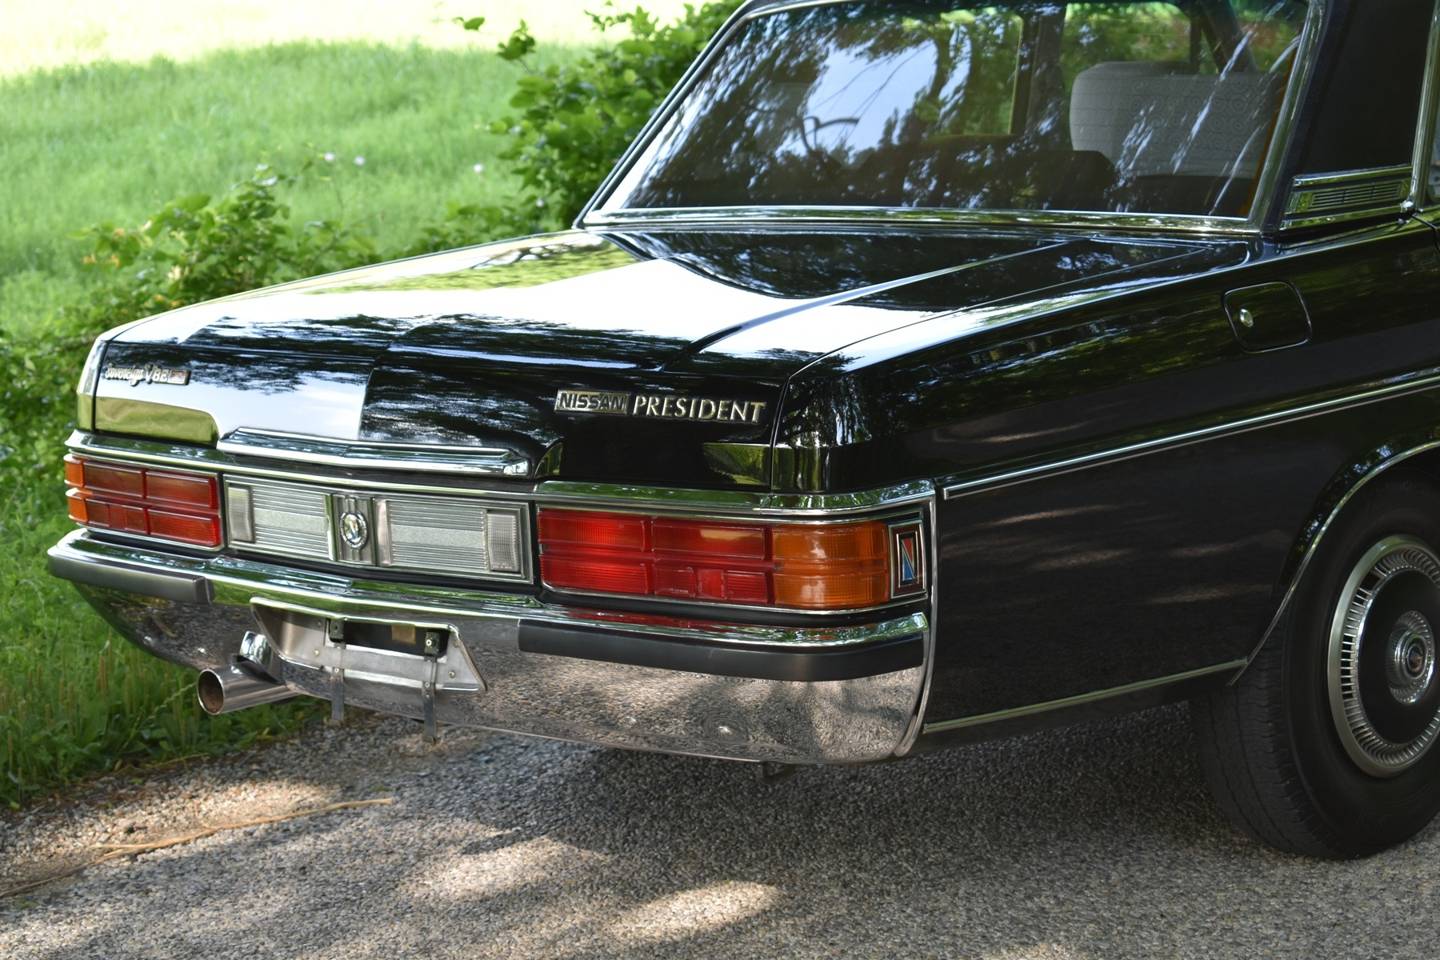 8th Image of a 1987 NISSAN PRESIDENT